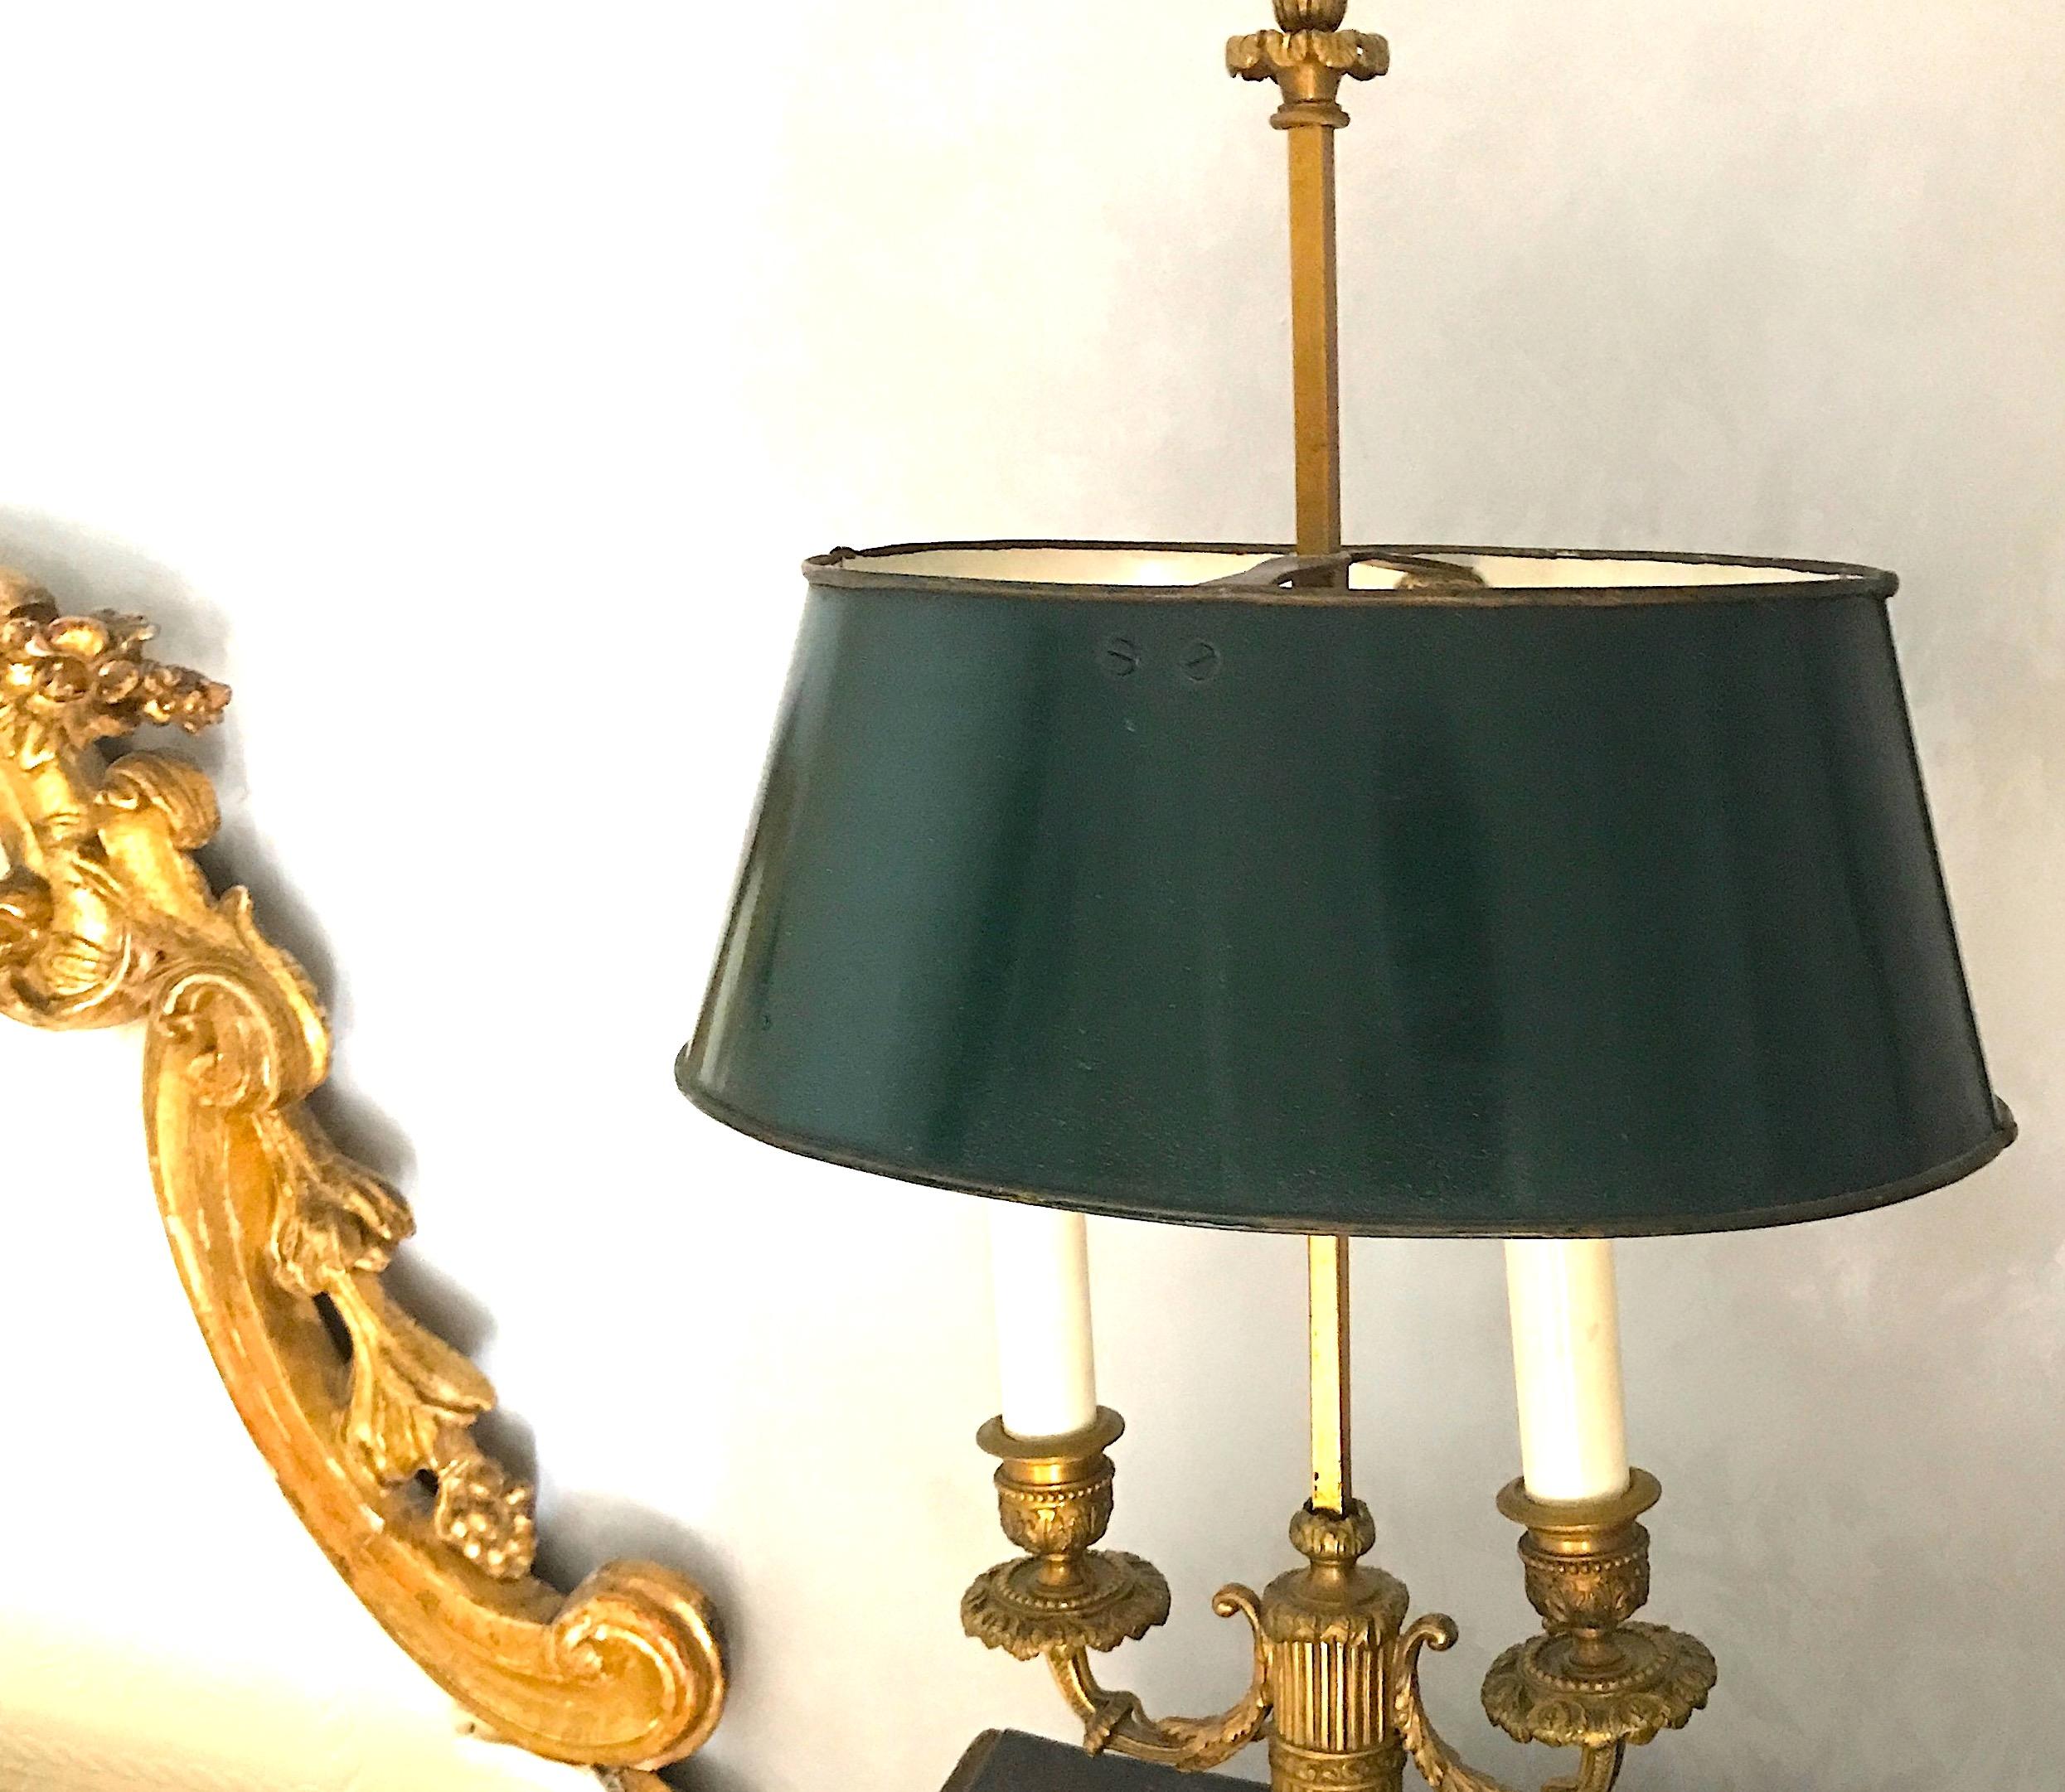 19th Century Pair of French Empire Gilt Bronze Two-Arm Bouillotte Lamps or Table Lamps, 1815 For Sale